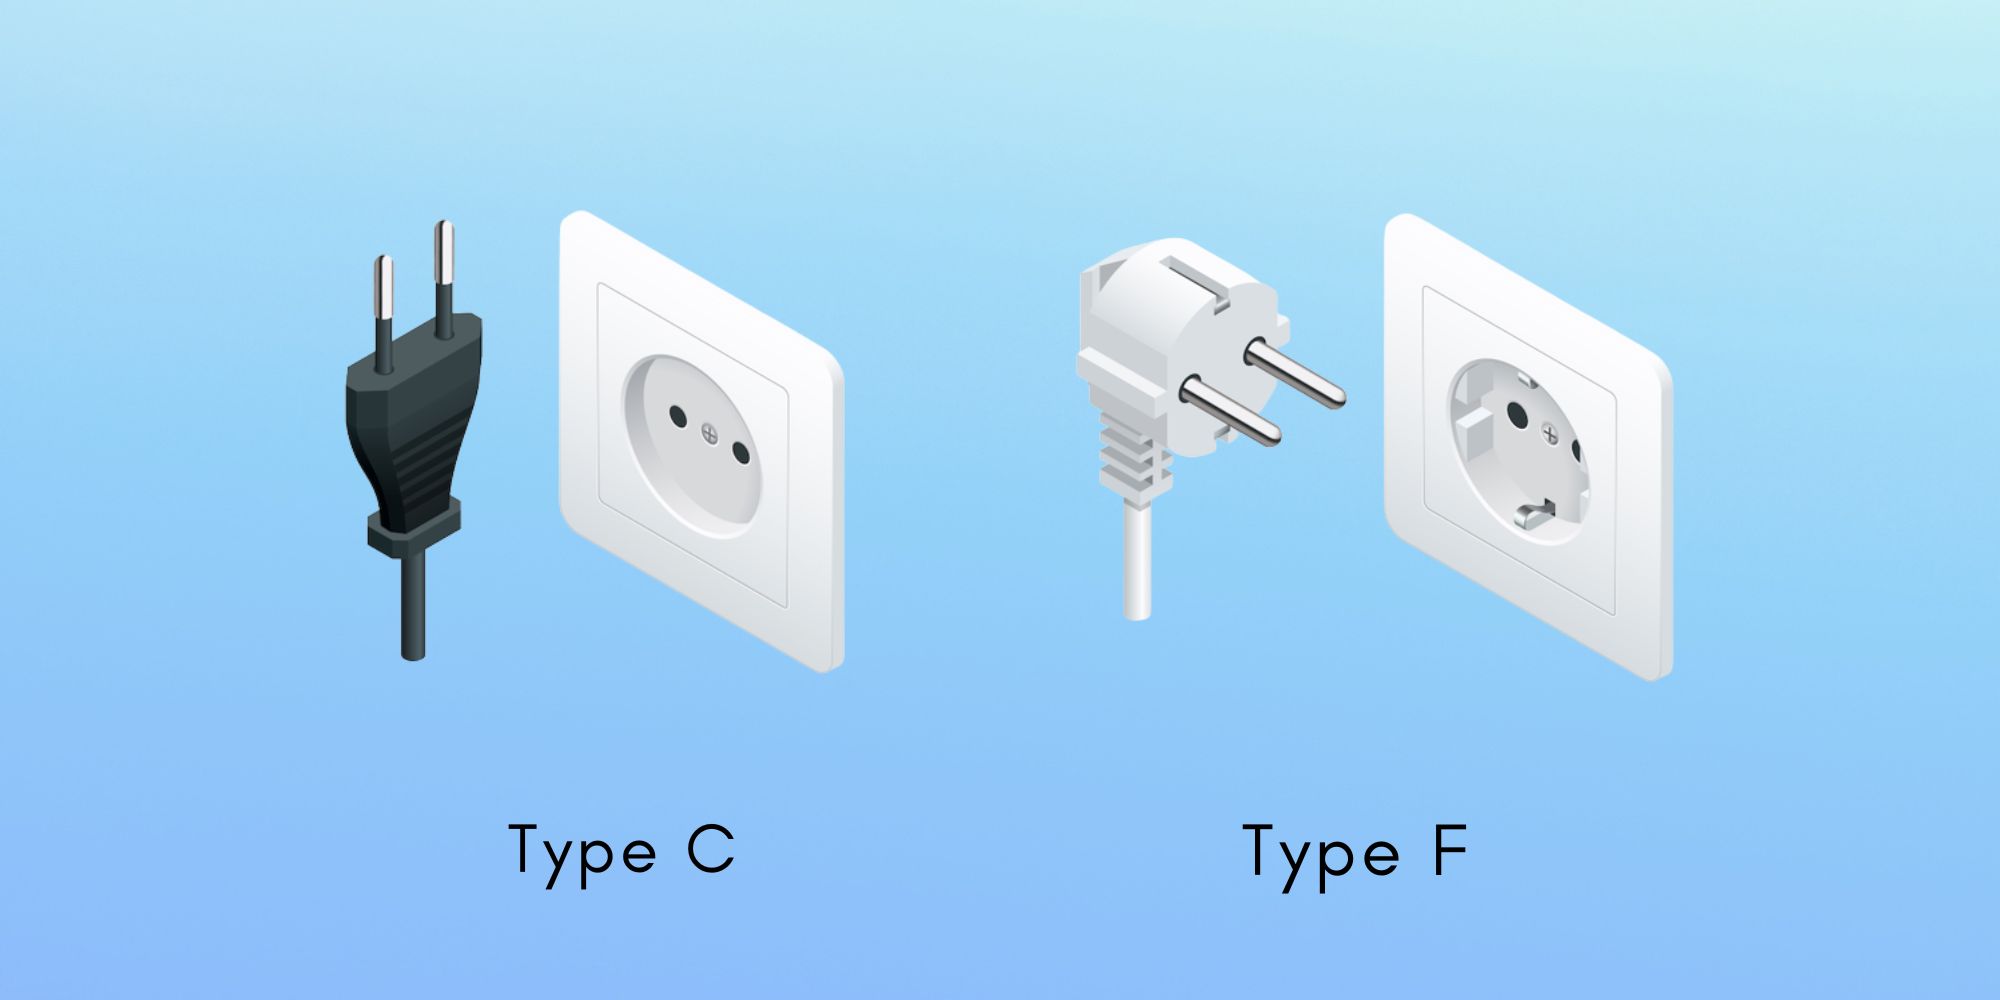 Portugal Power Plugs and Sockets: Type C and Type F
